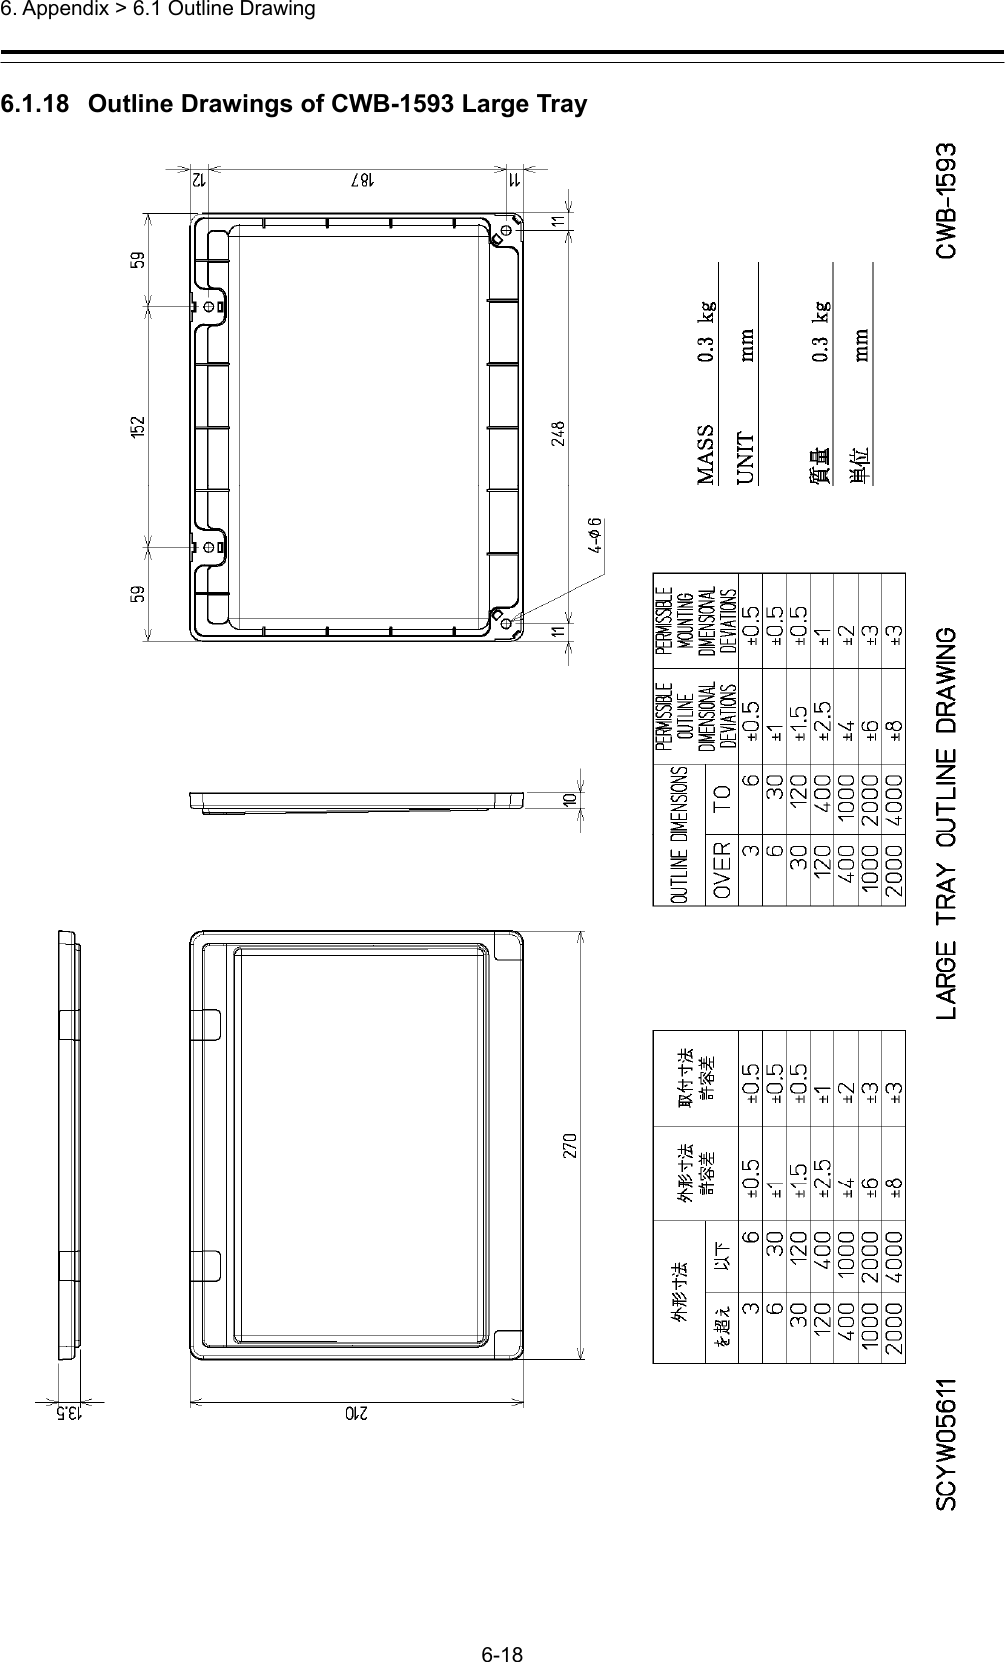  6. Appendix &gt; 6.1 Outline Drawing 6-18  6.1.18  Outline Drawings of CWB-1593 Large Tray  